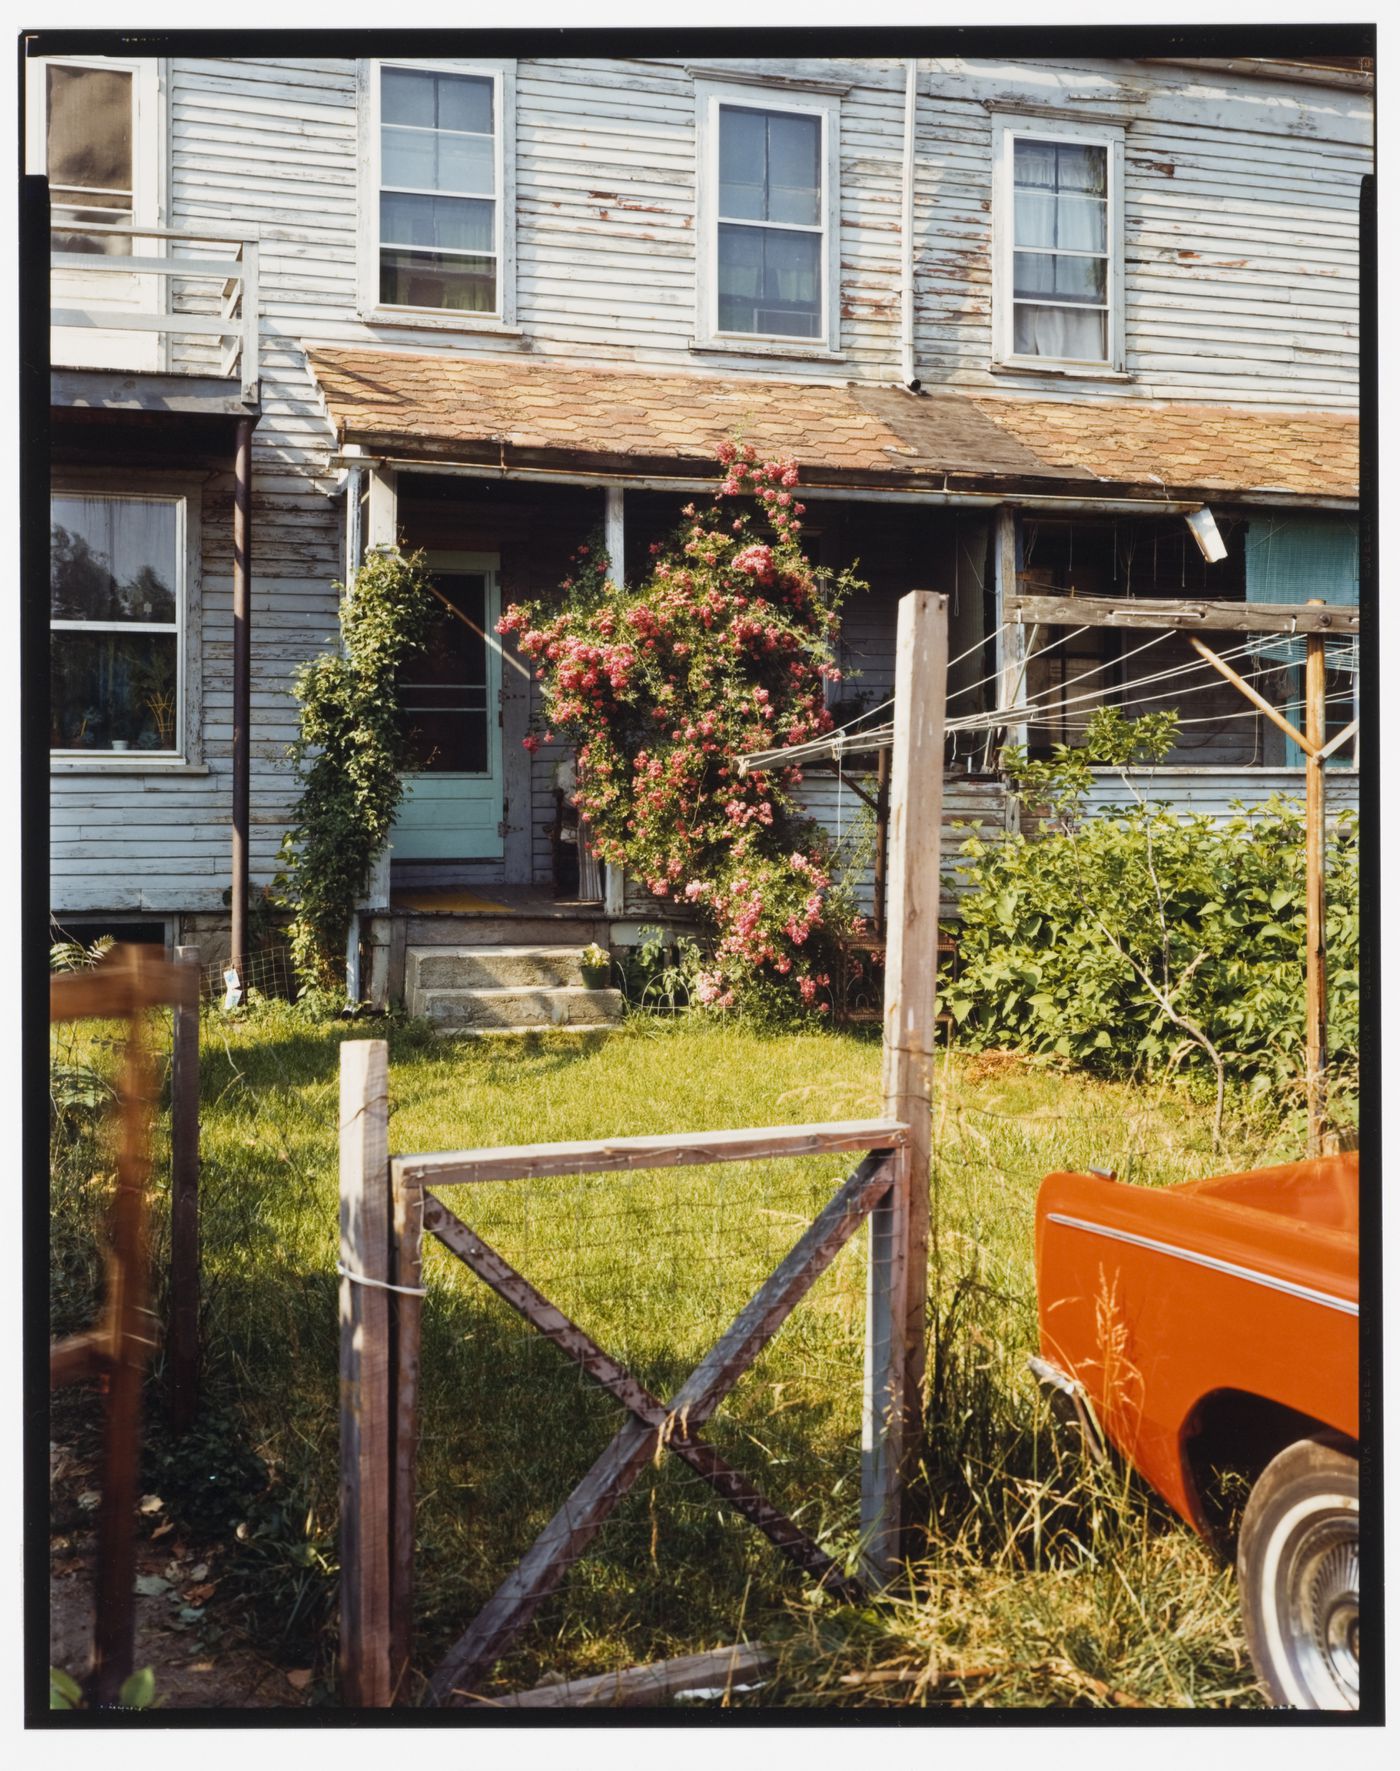 View of houses, grass and the front corner of a red car, Washington Ave., North Adams, Massachusetts